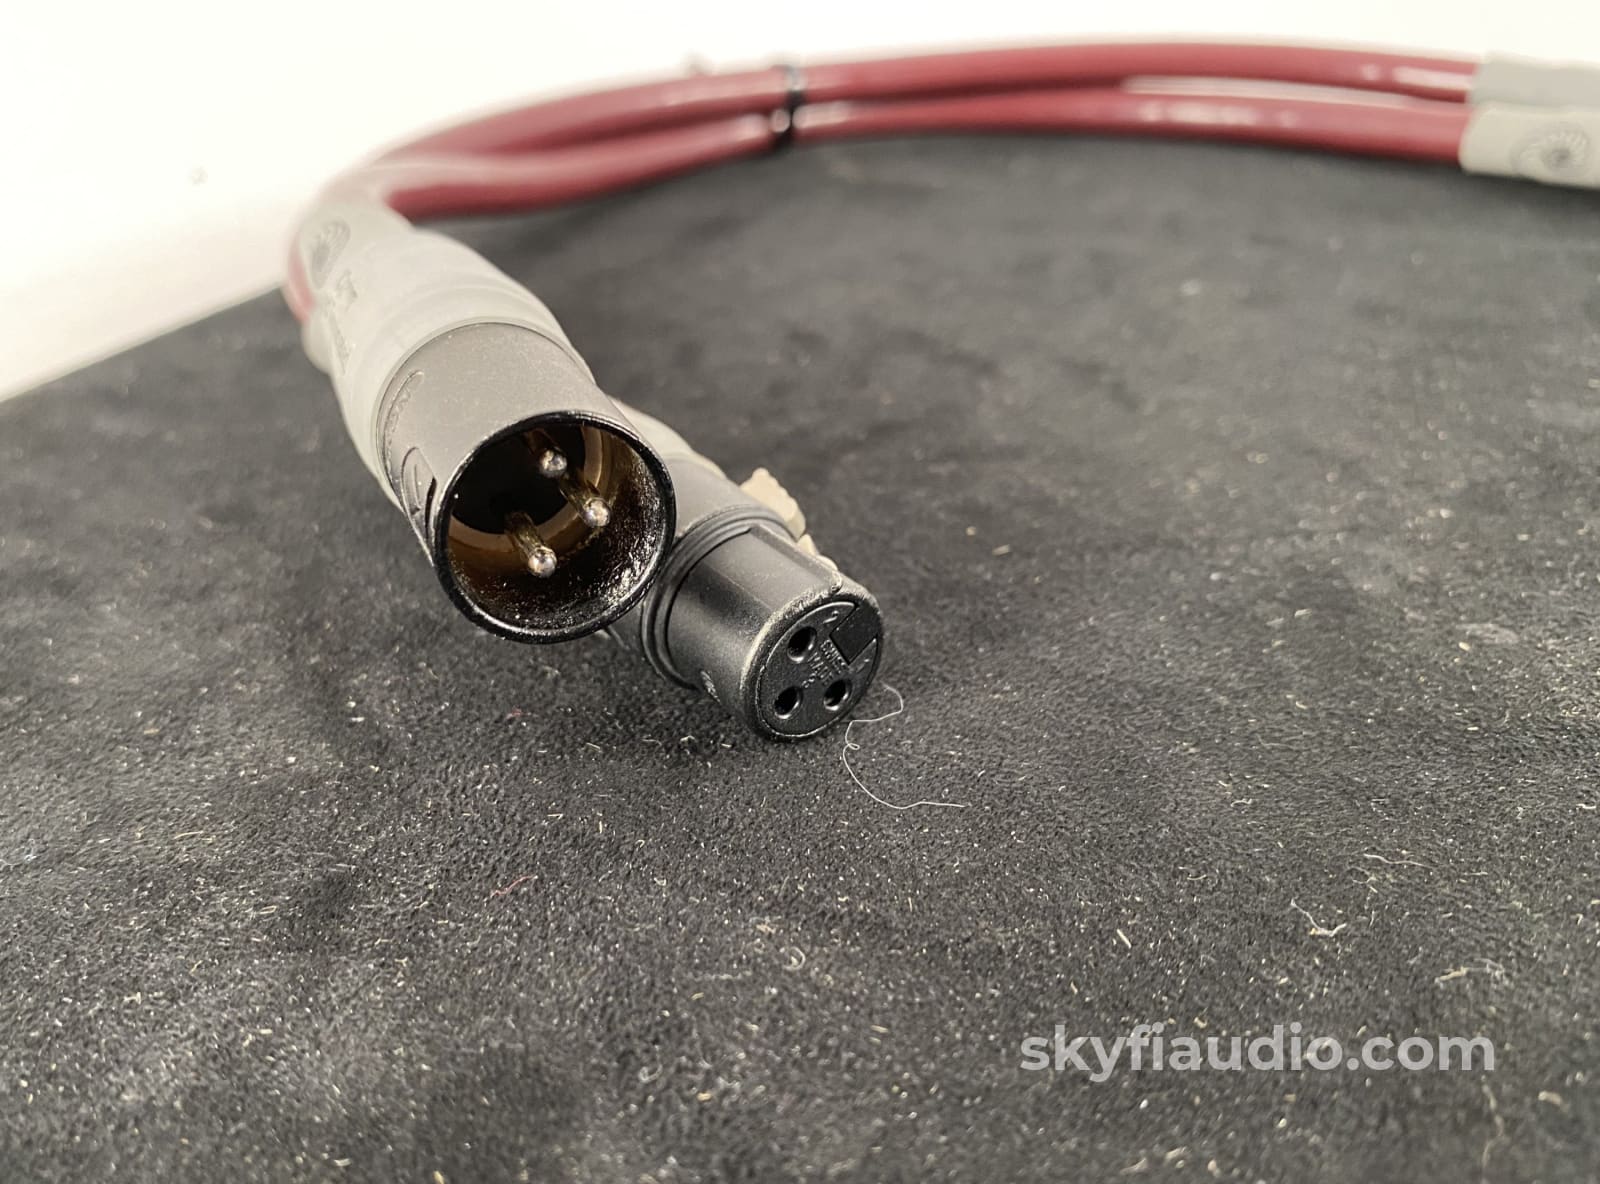 Cardas Audio Golden Cross Xlr Interconnects 0.5M Cables